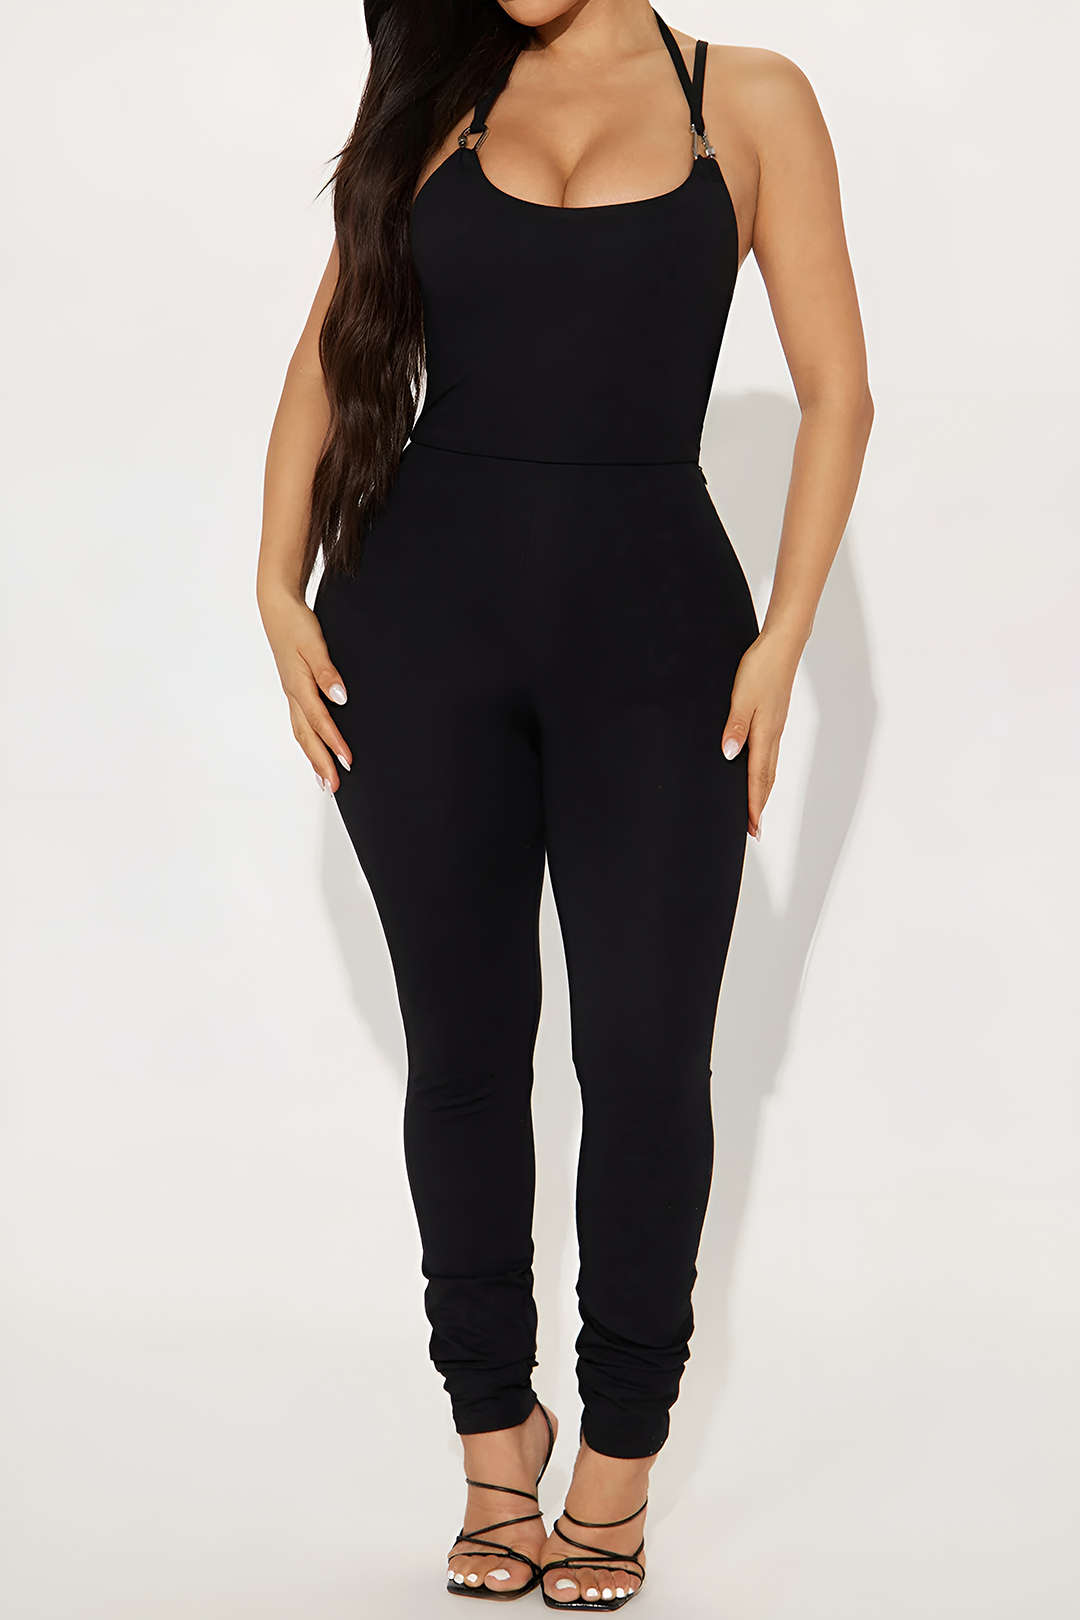 Backless Strappy Jumpsuit